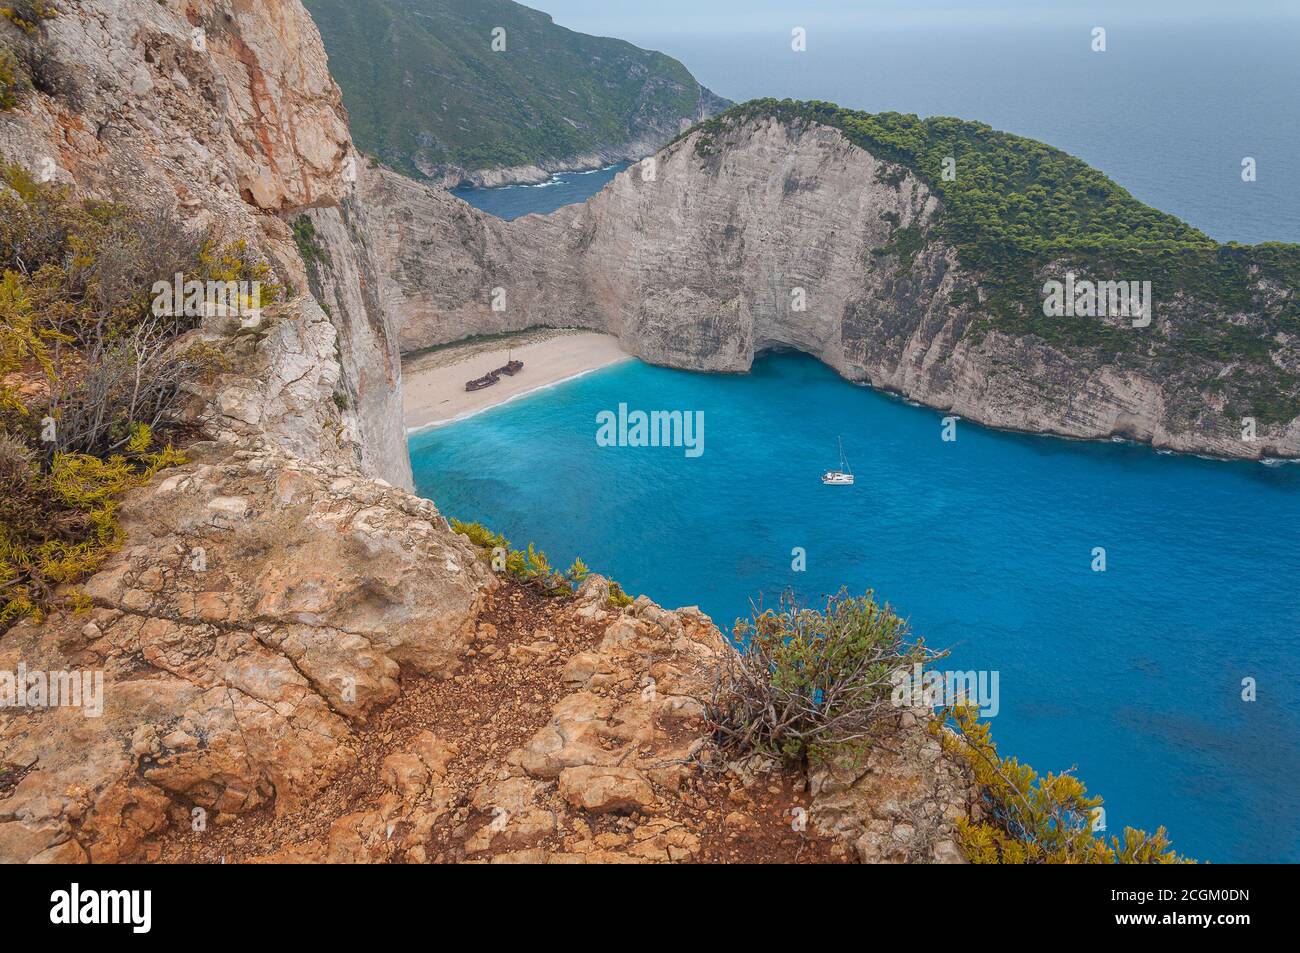 Panorama of the cove of the shipwreck beach and its white limestone cliffs and catamaran moored, Zakynthos island, Greece Stock Photo